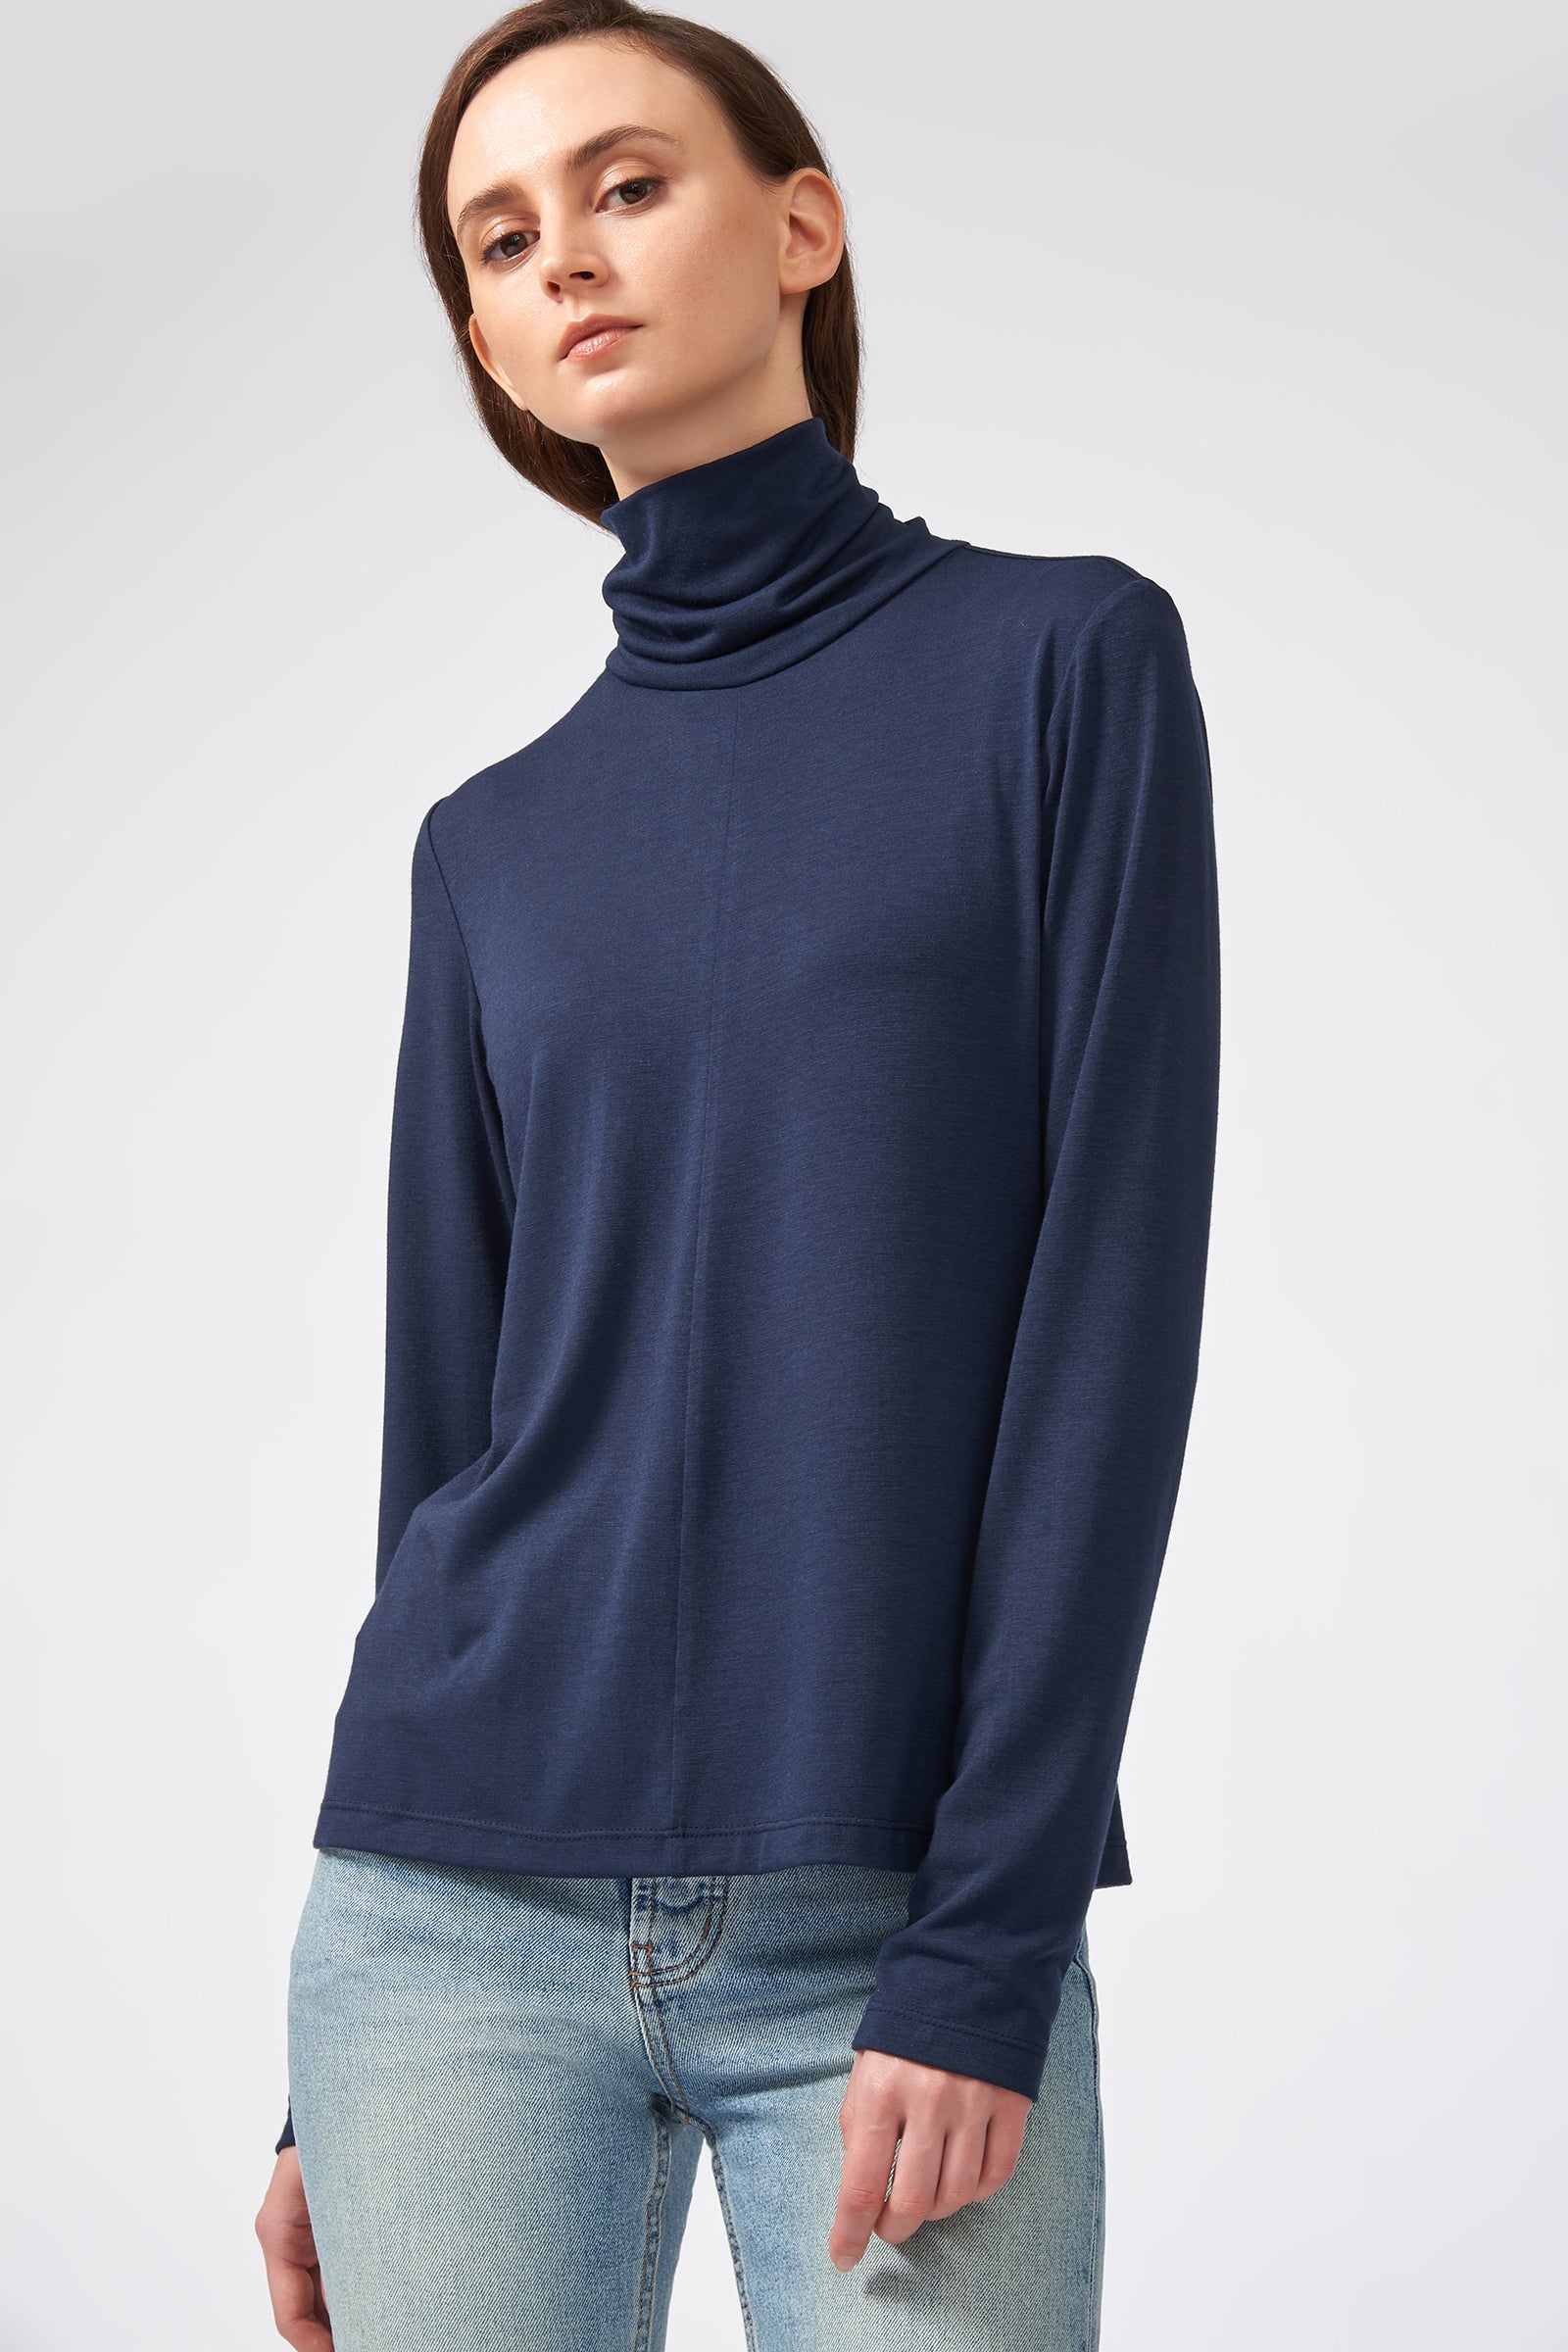 Kal Rieman Seamed Fitted Turtleneck in Navy on Model Front View